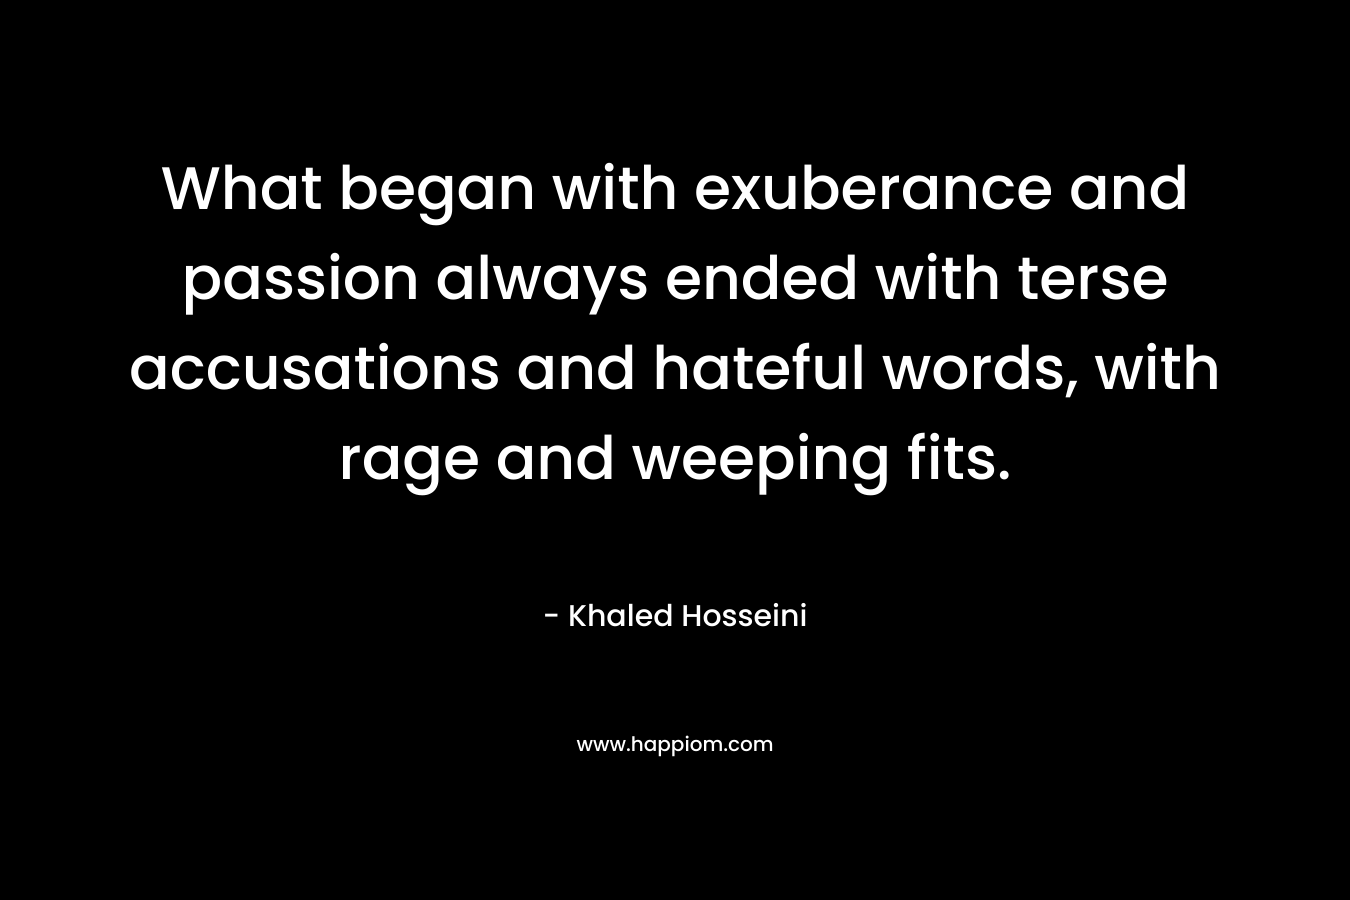 What began with exuberance and passion always ended with terse accusations and hateful words, with rage and weeping fits.